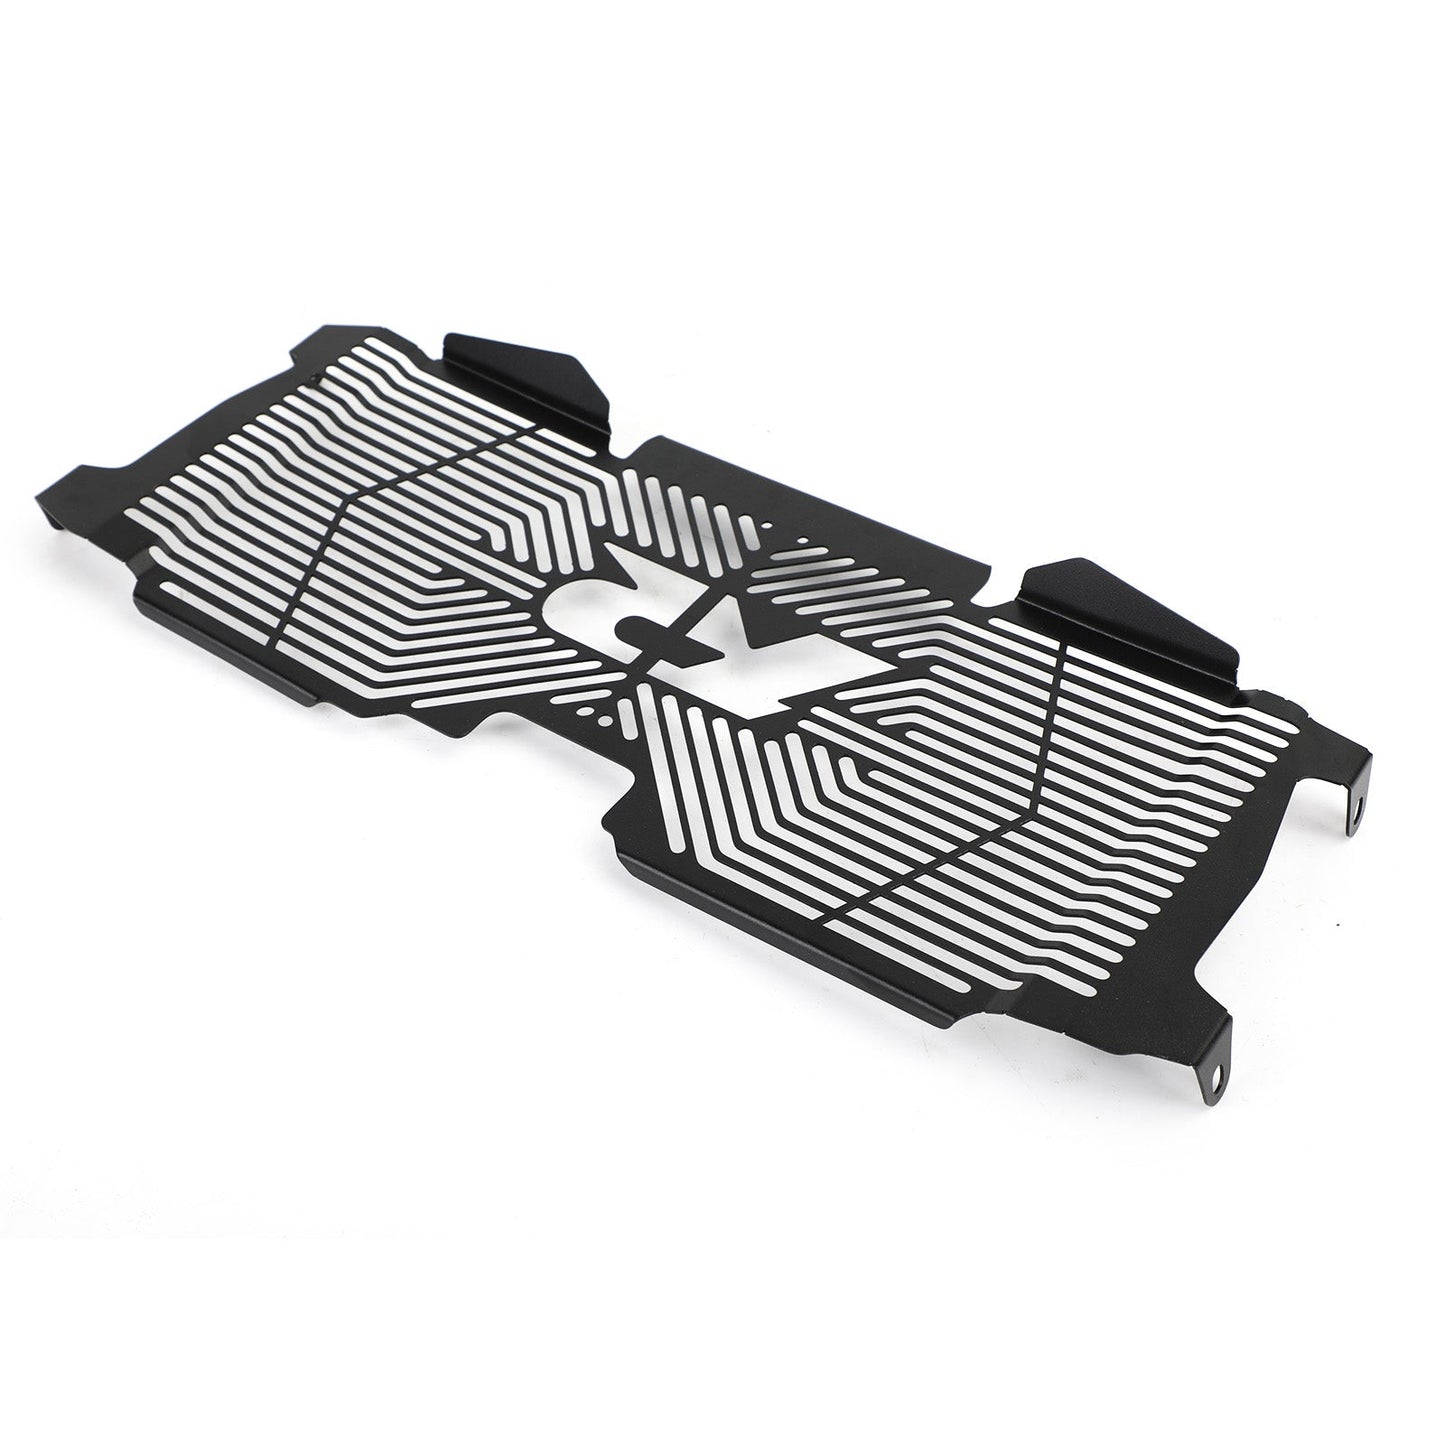 Stainless Steel Radiator Guard Protector Grill Cover Fit For BMW R1200RS R1250RS R1200R 15-20